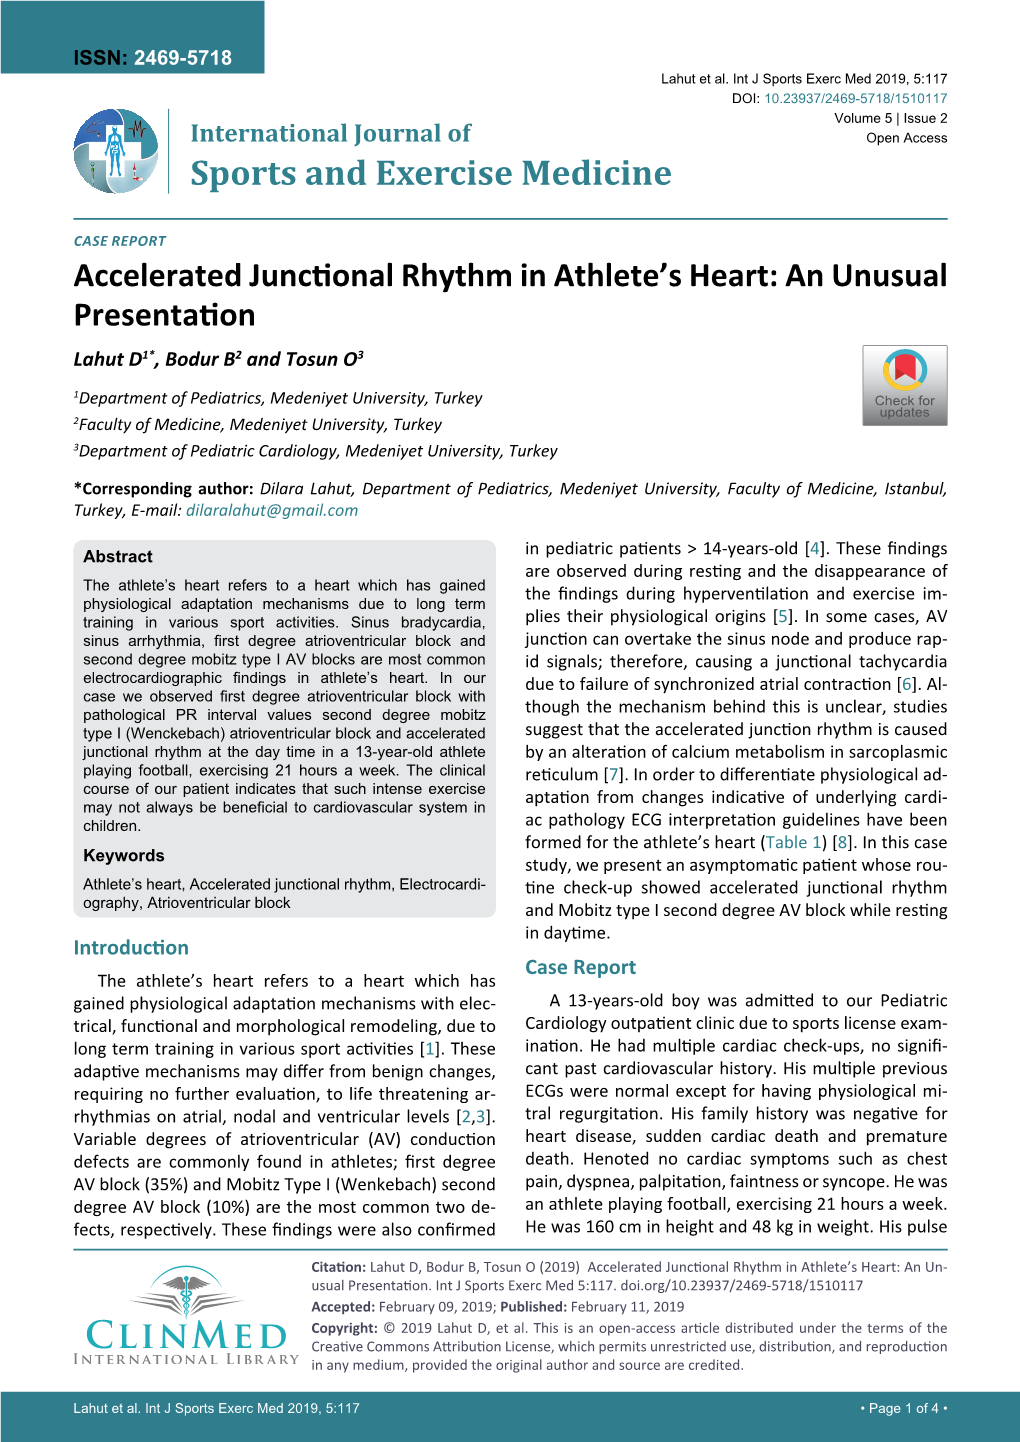 Accelerated Junctional Rhythm in Athlete's Heart: an Un-Usual